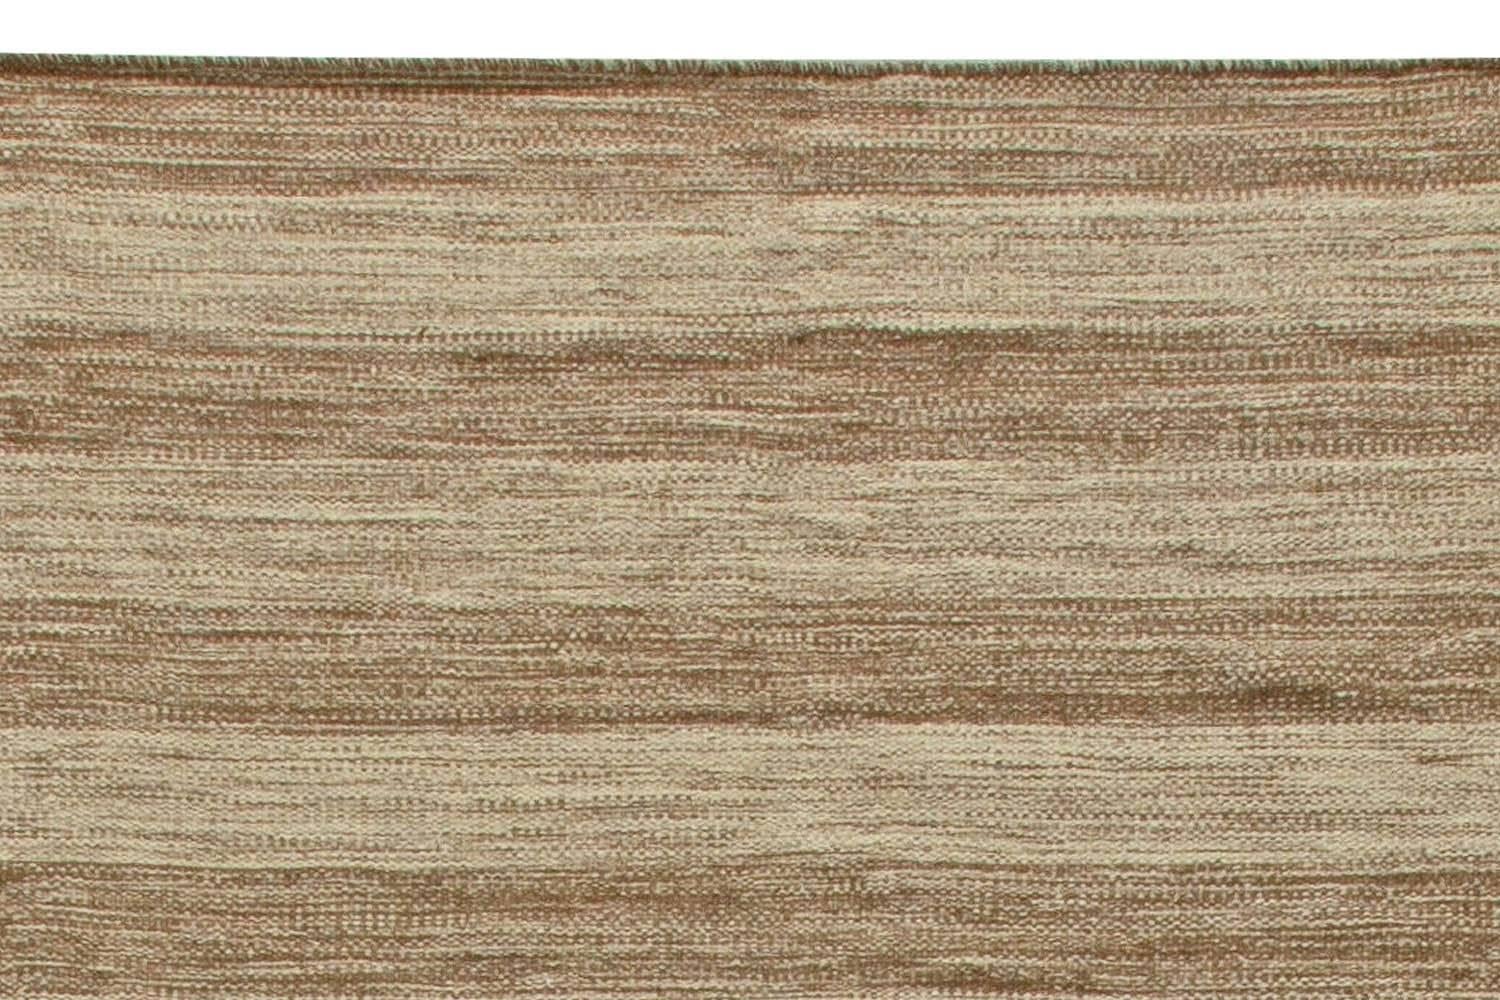 Contemporary Striped Brown and Beige Flat-Weave Wool Rug by Doris Leslie Blau In New Condition For Sale In New York, NY